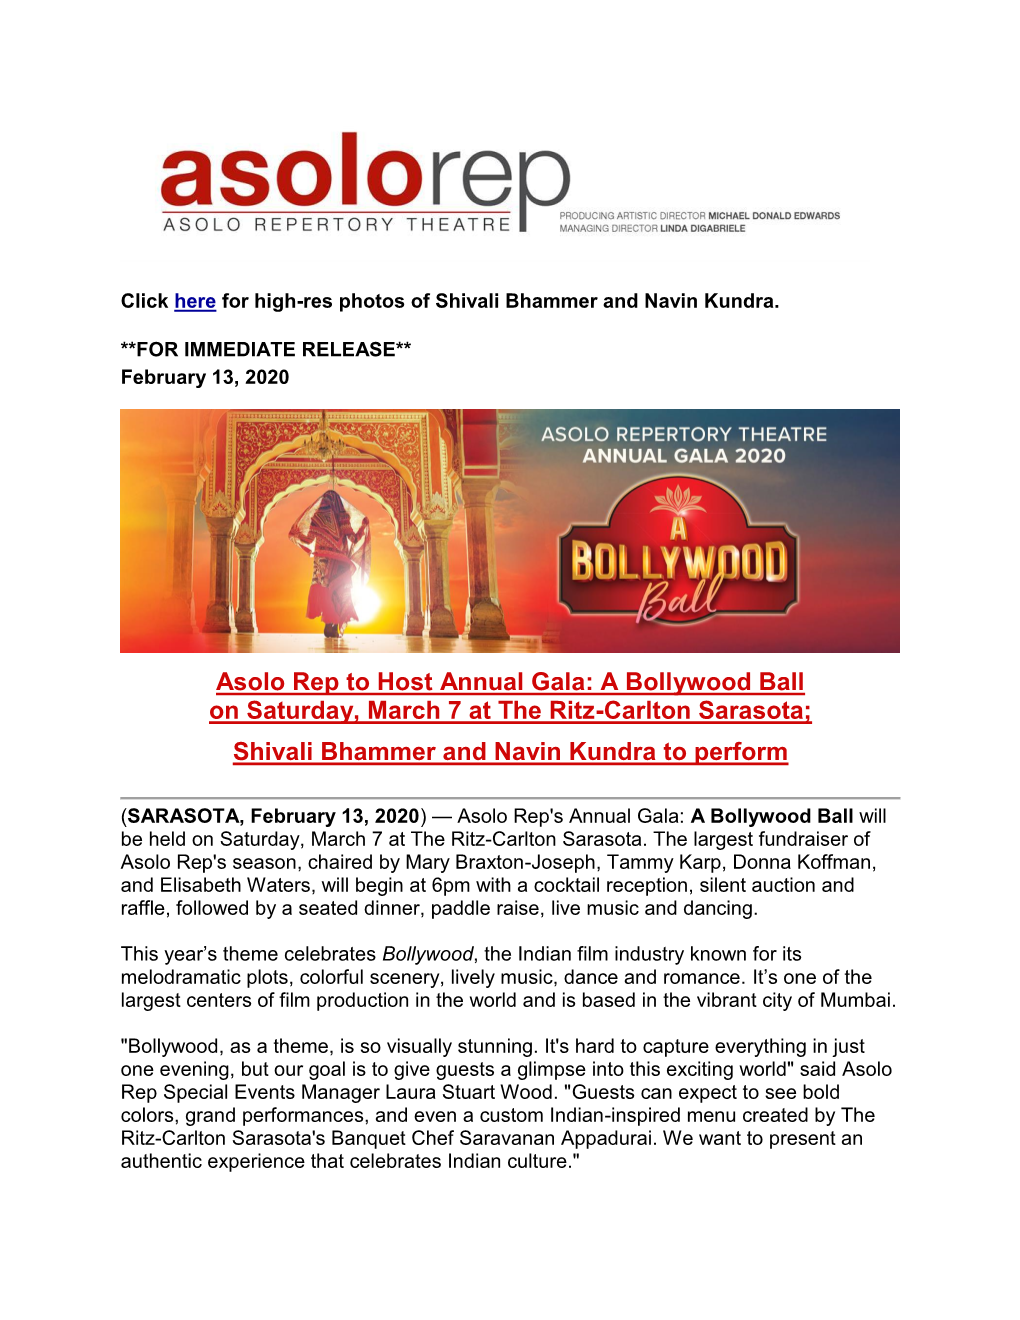 Asolo Rep to Host Annual Gala: a Bollywood Ball on Saturday, March 7 at the Ritz-Carlton Sarasota; Shivali Bhammer and Navin Kundra to Perform